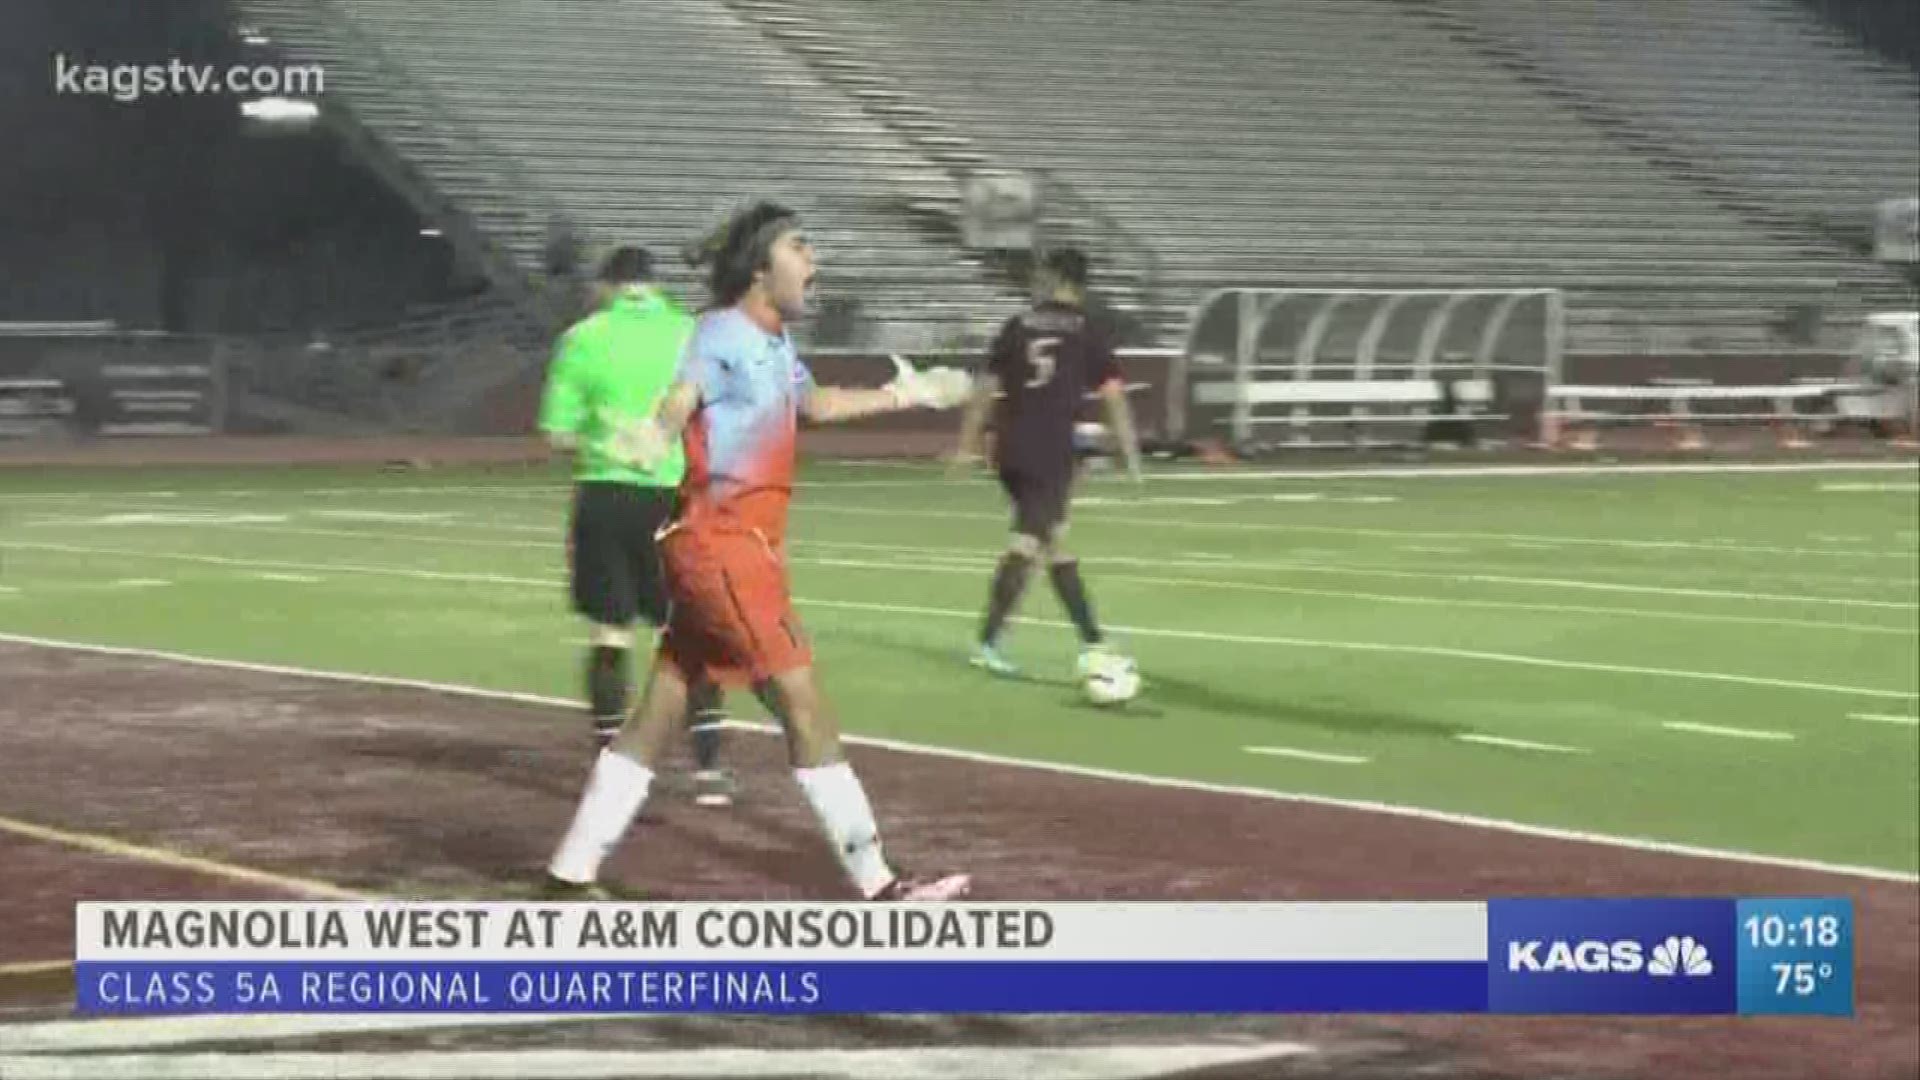 A&M Consolidated defeated Magnolia West 4-2 in PKs on Friday night.